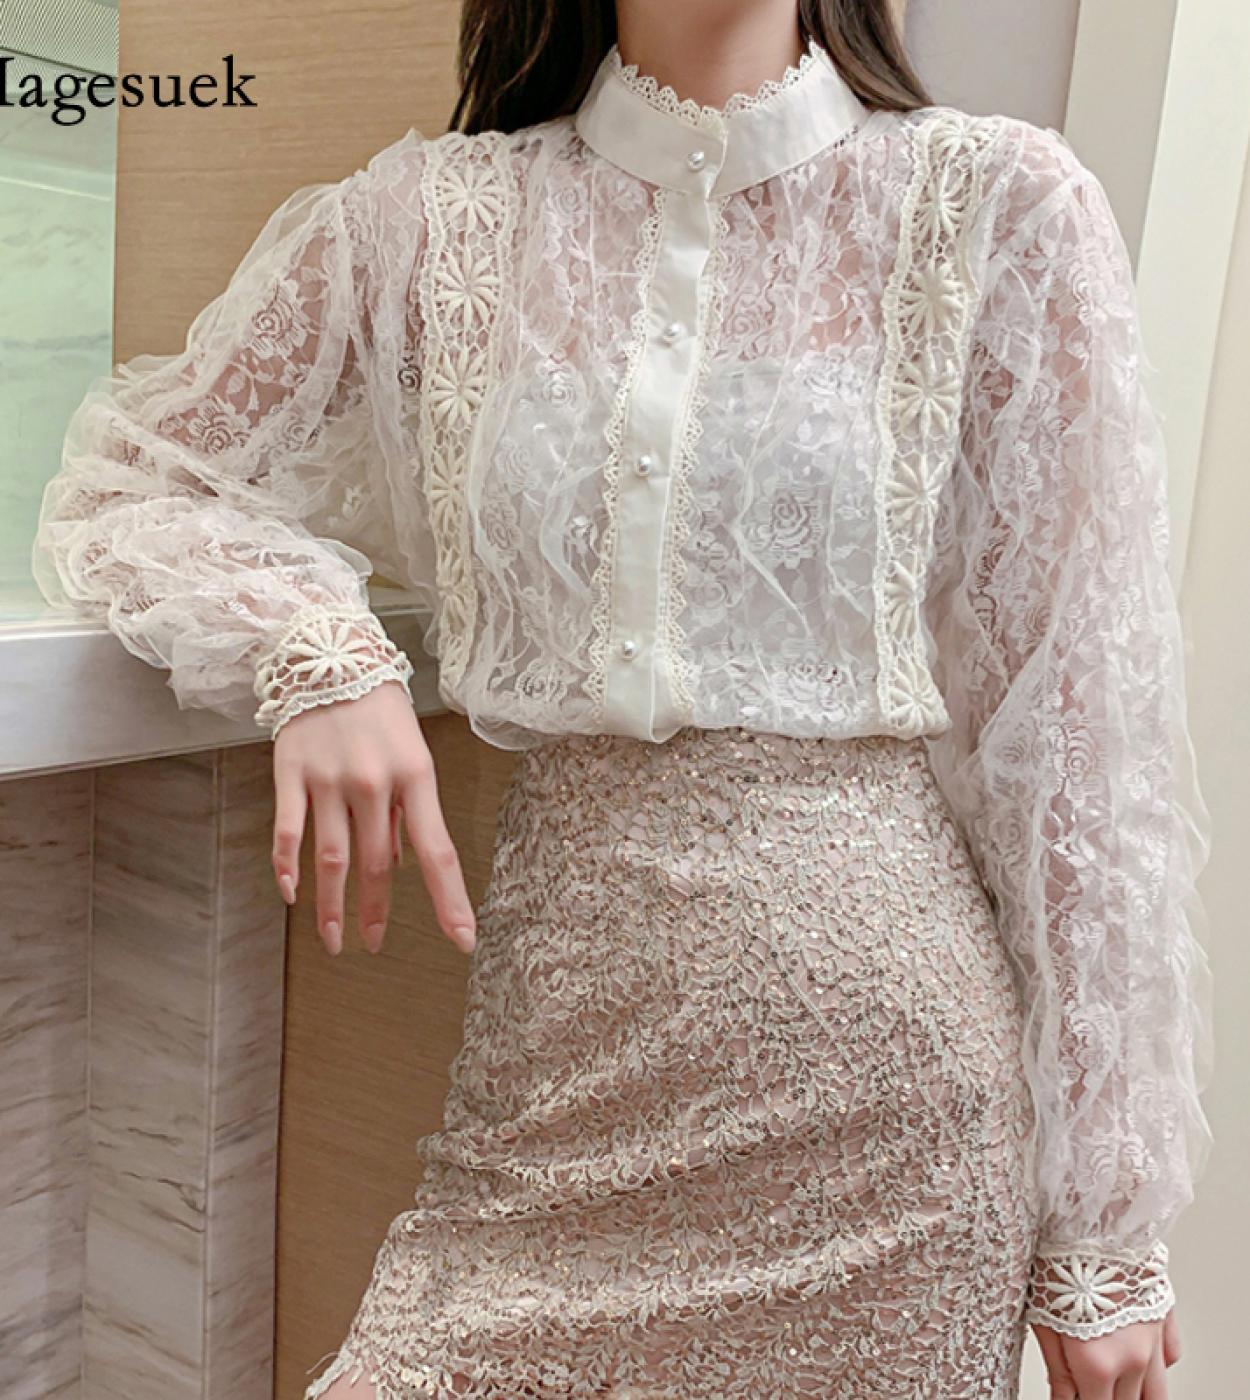   Lace Stitching Shirt Retro Palace Style Romantic Pearl Button Top Female Long Sleeve Standcollar Women Blouse 12929  B